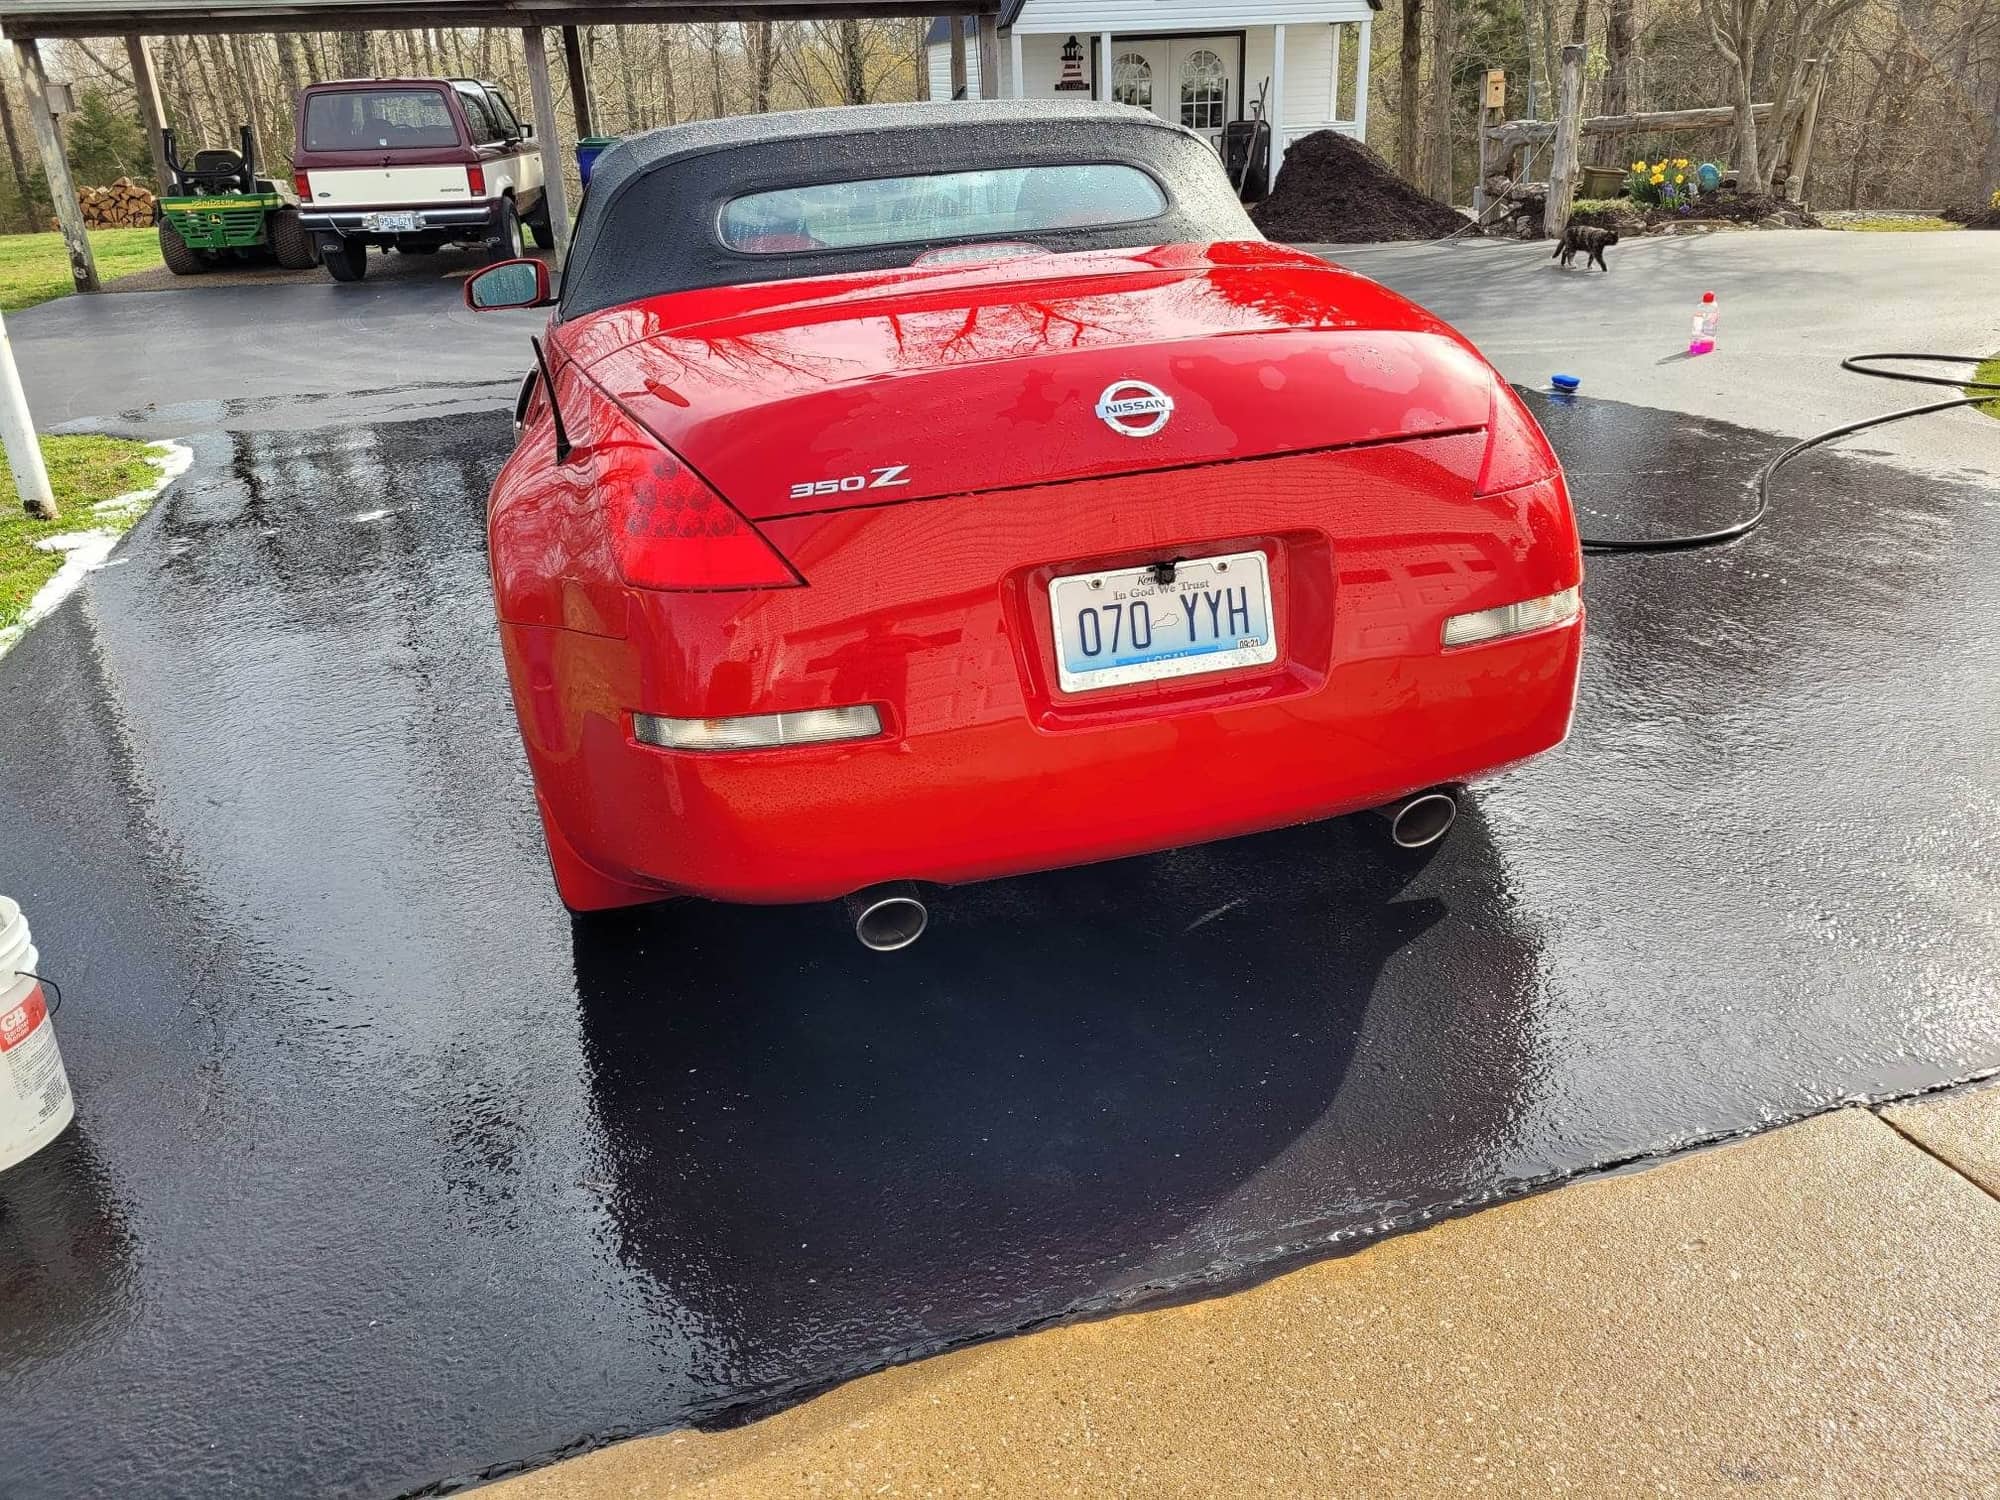 2007 Nissan 350Z - 2007 350z convertible roadster - Used - VIN JNB1B236A17M65387 - 52,000 Miles - 6 cyl - 2WD - Automatic - Convertible - Red - Russellville, KY 42276, United States